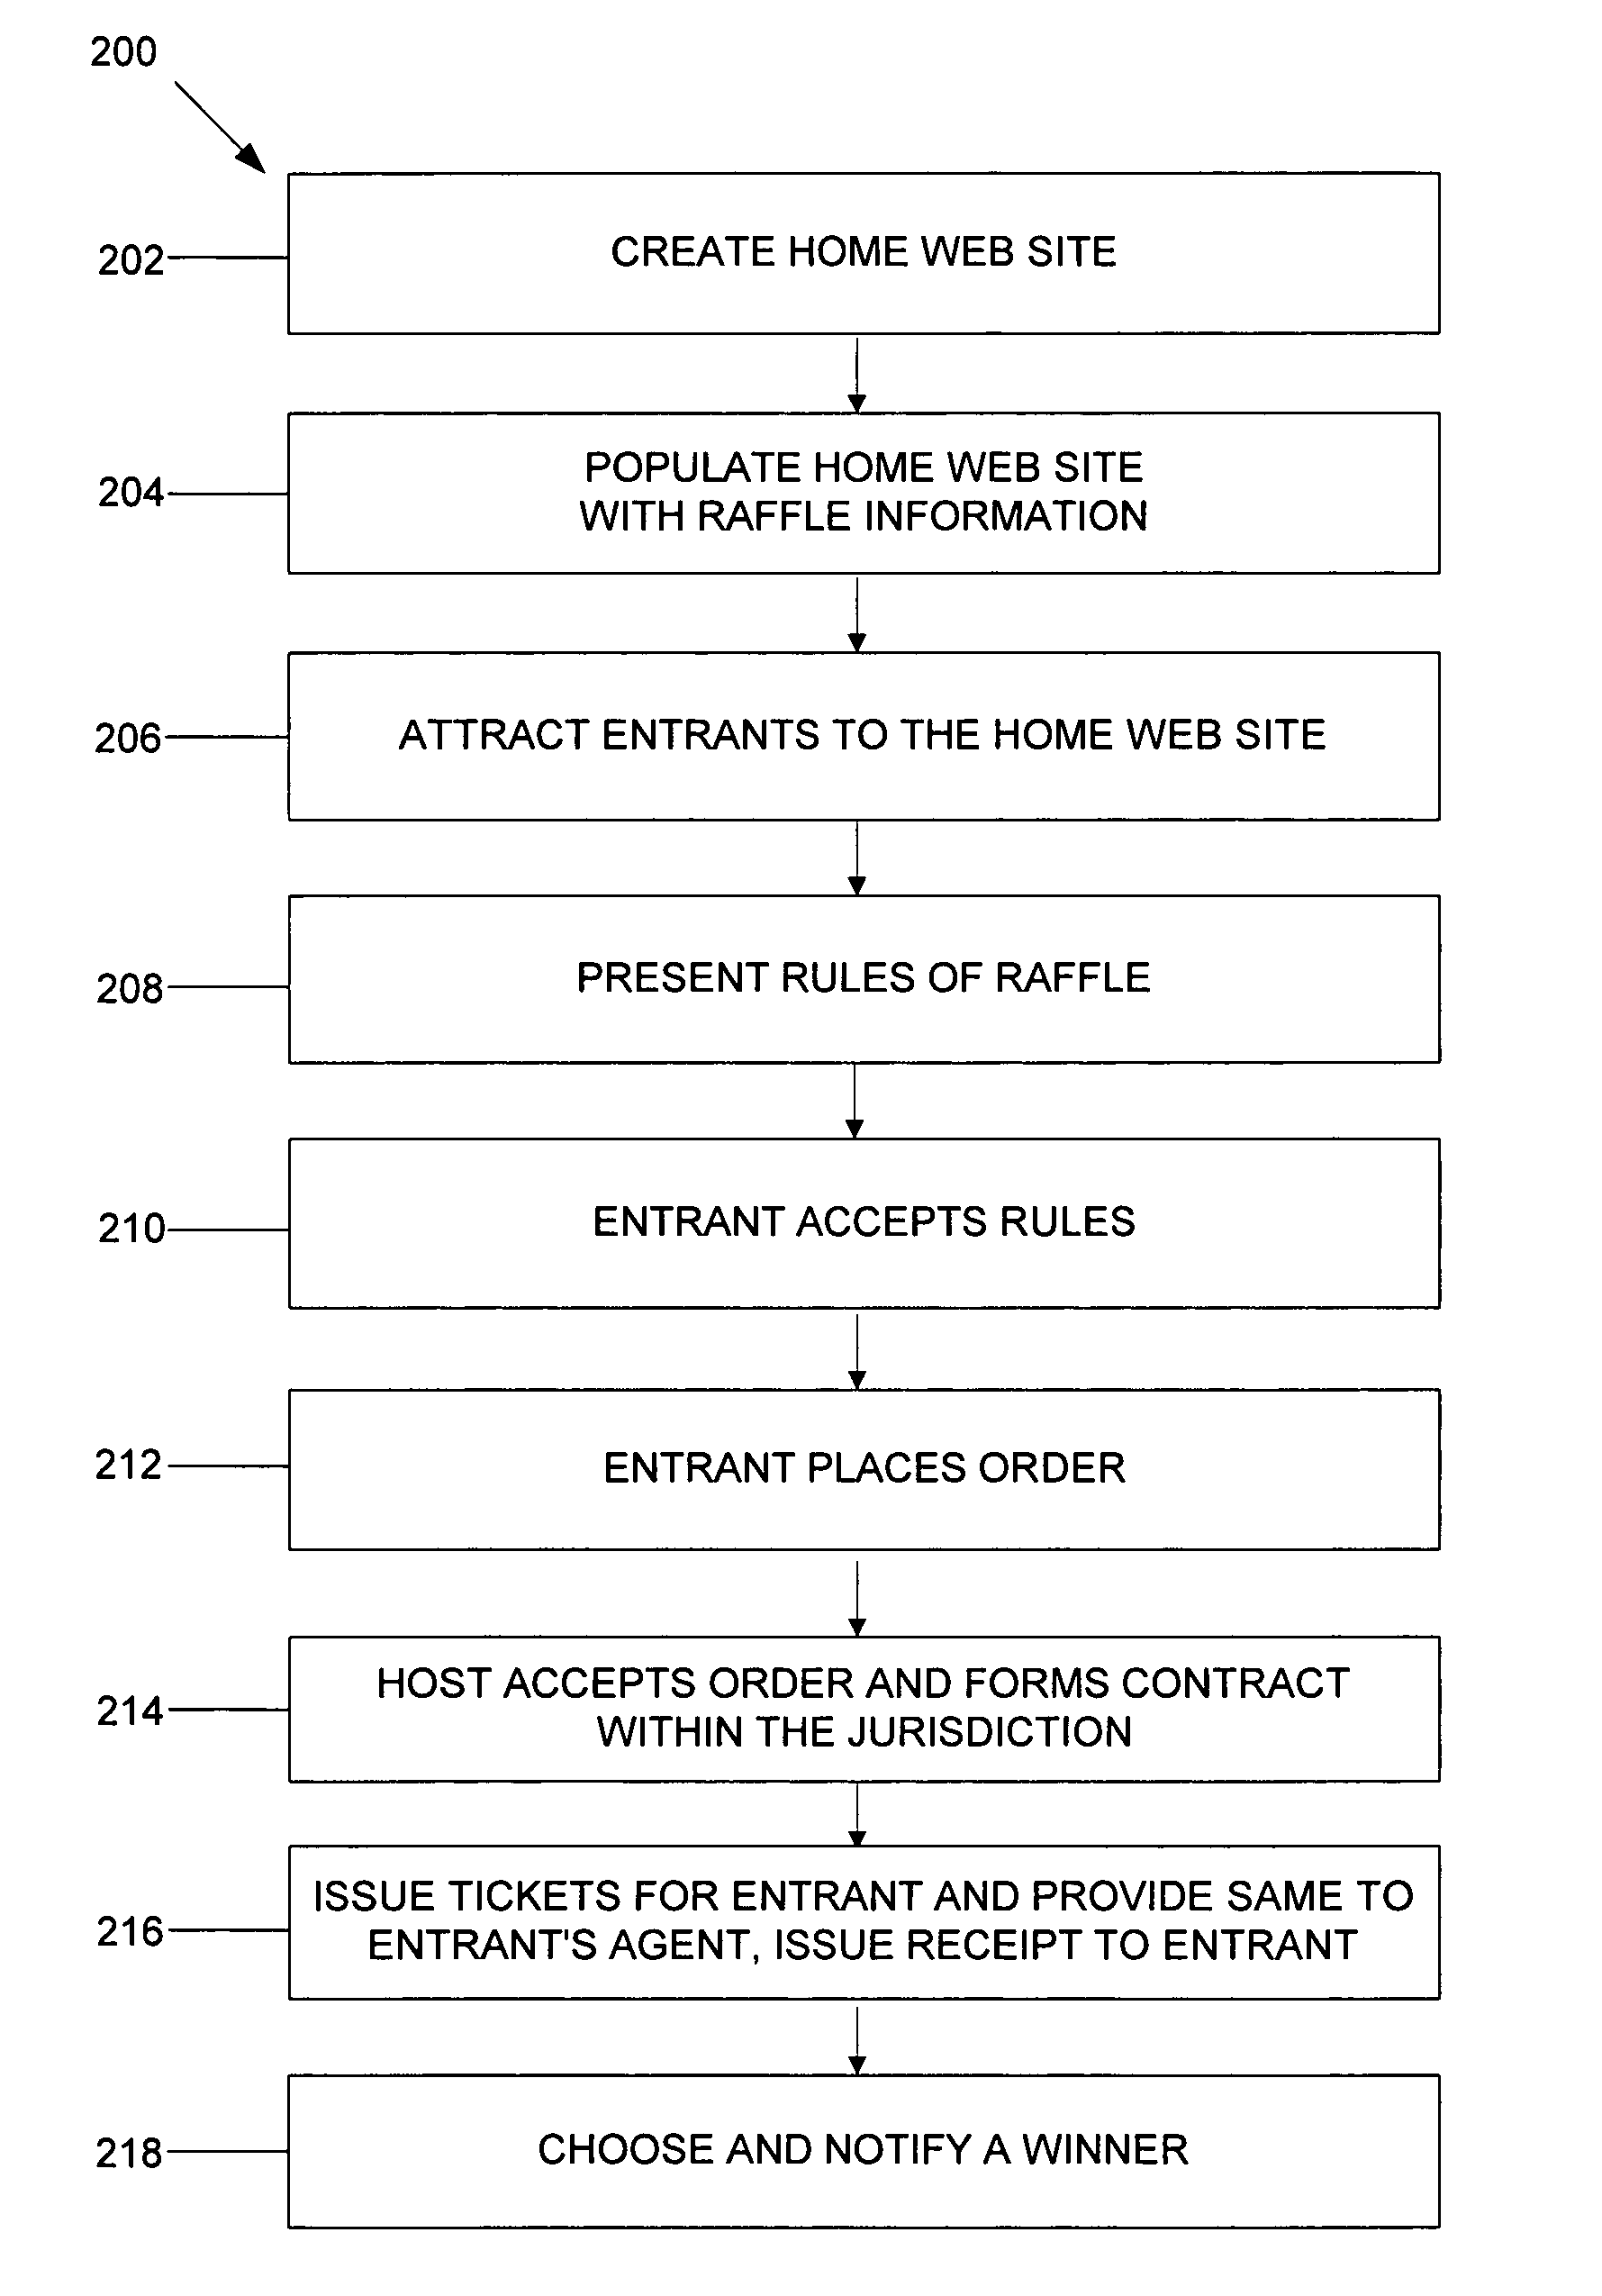 Methods and systems for a single jurisdiction raffle in a distributed computing network